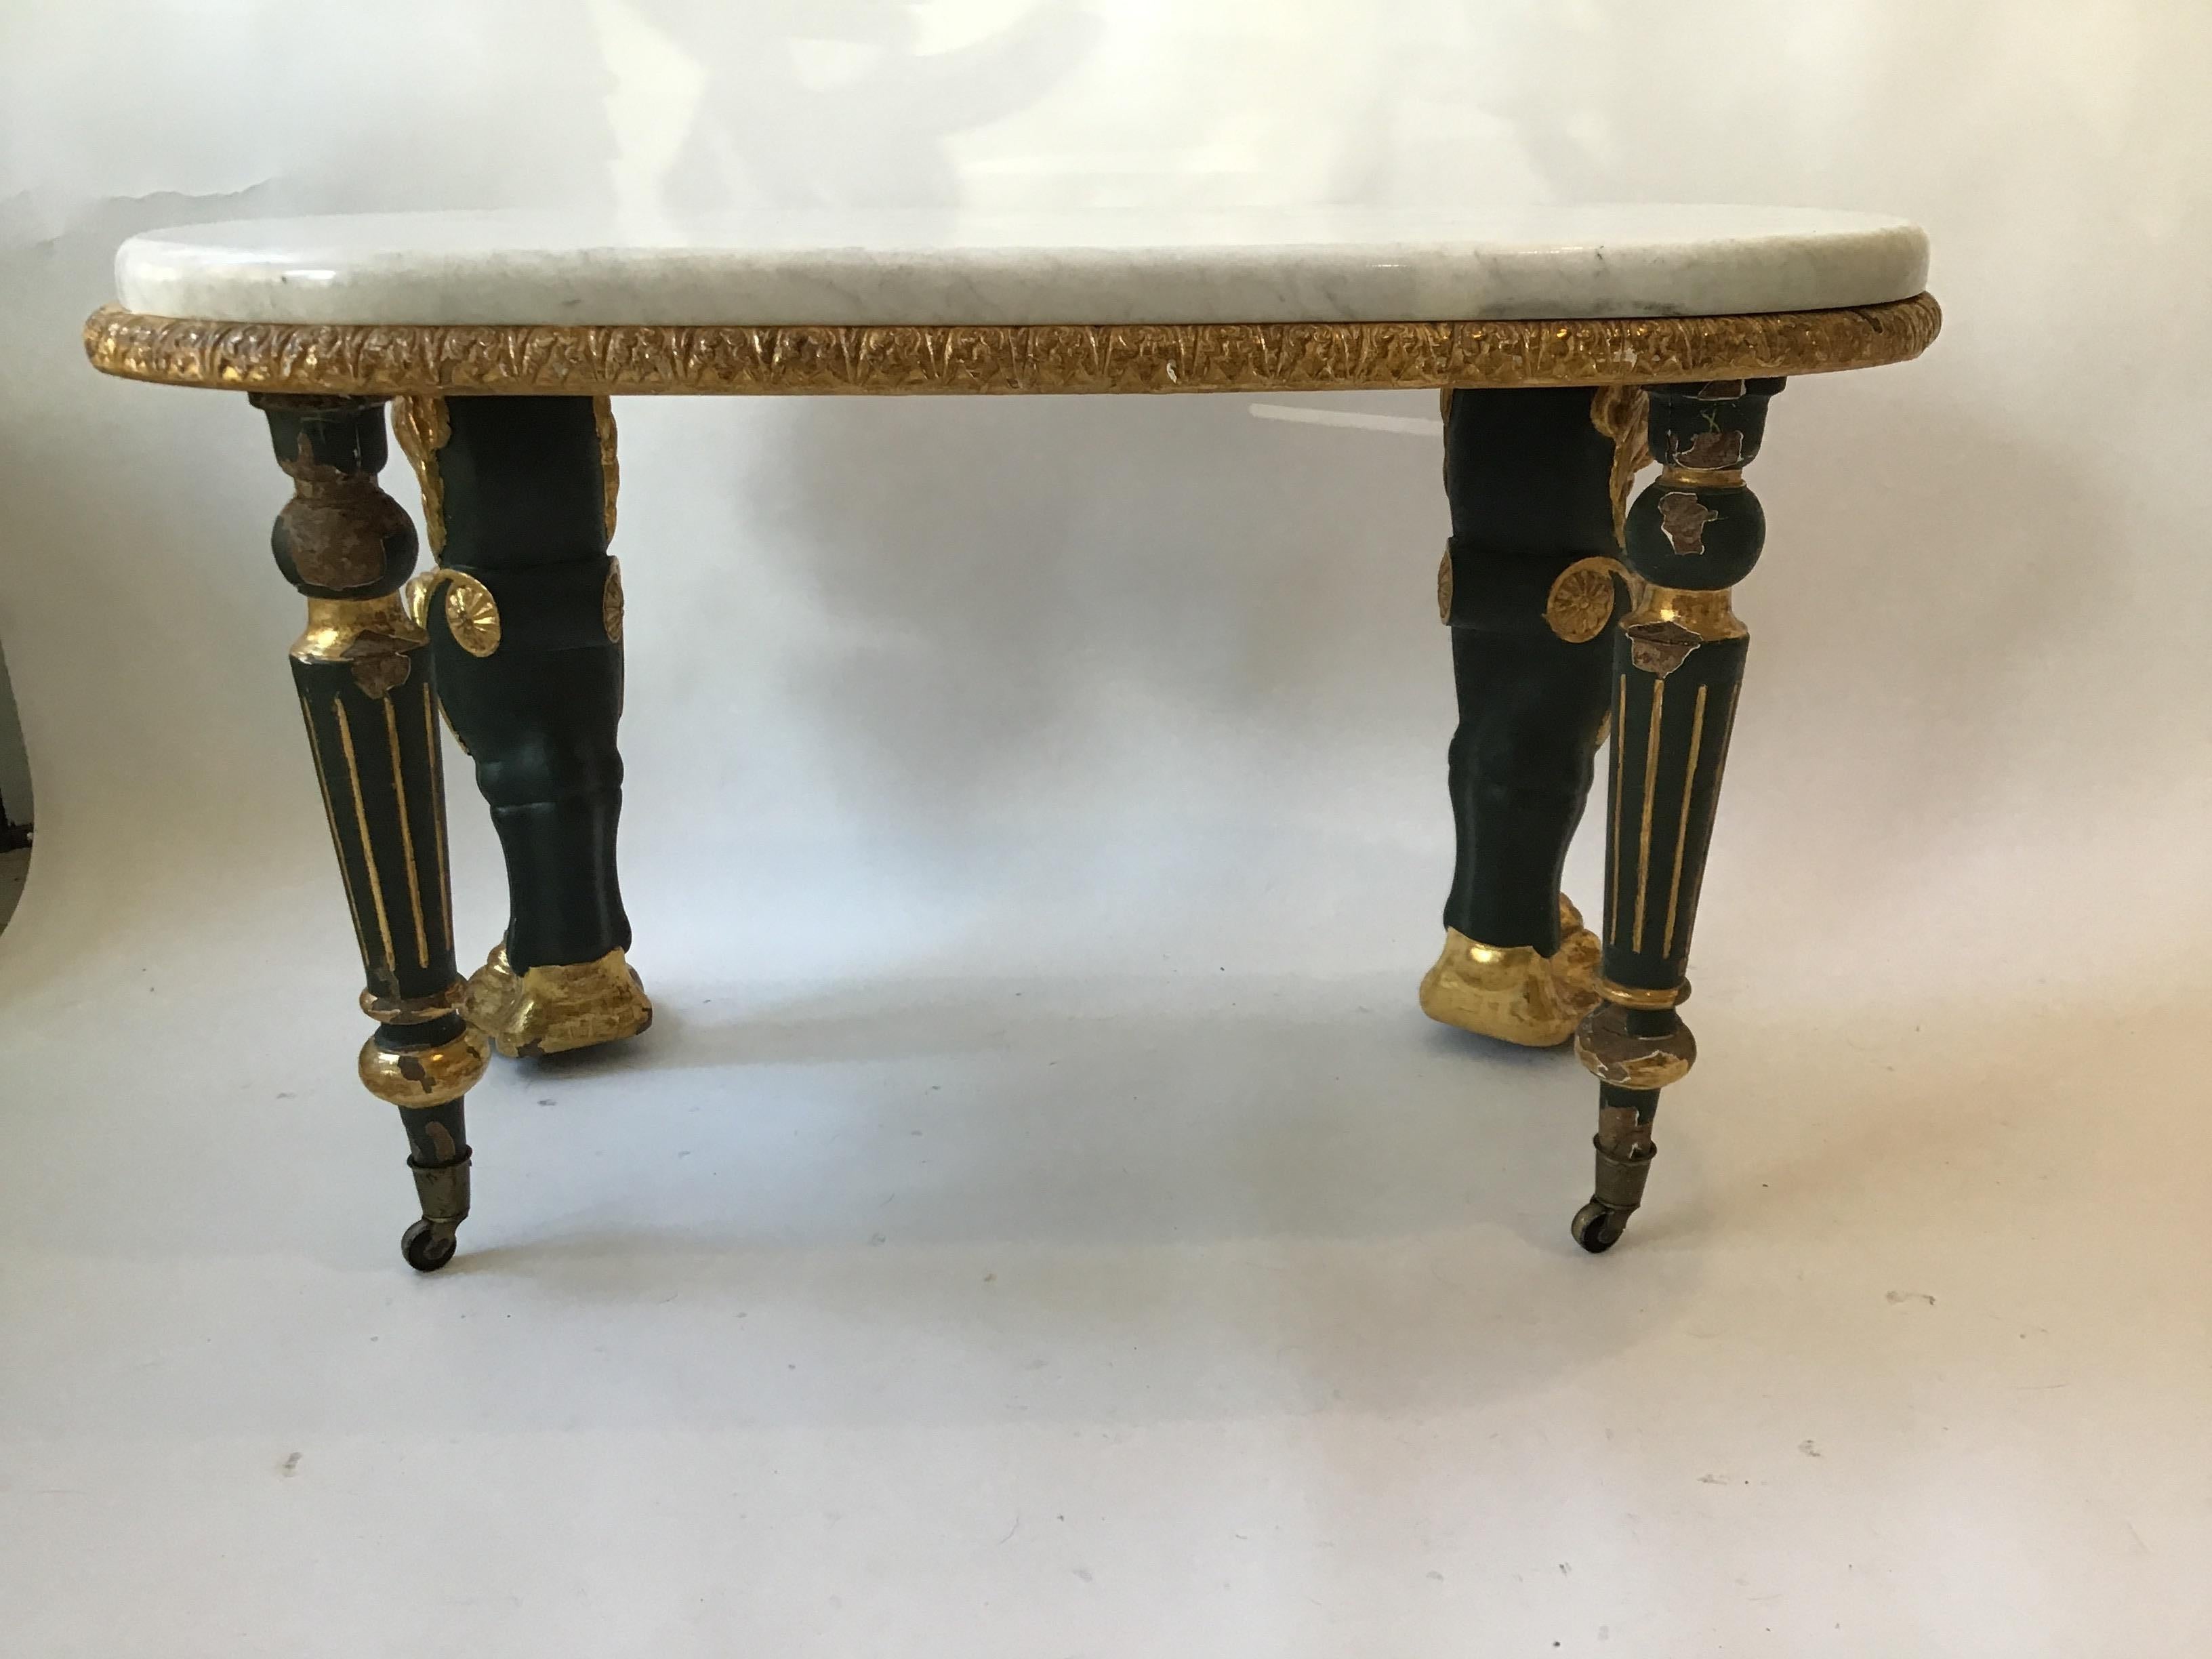 1880s French Gilt Lion Table with Marble Top For Sale 2